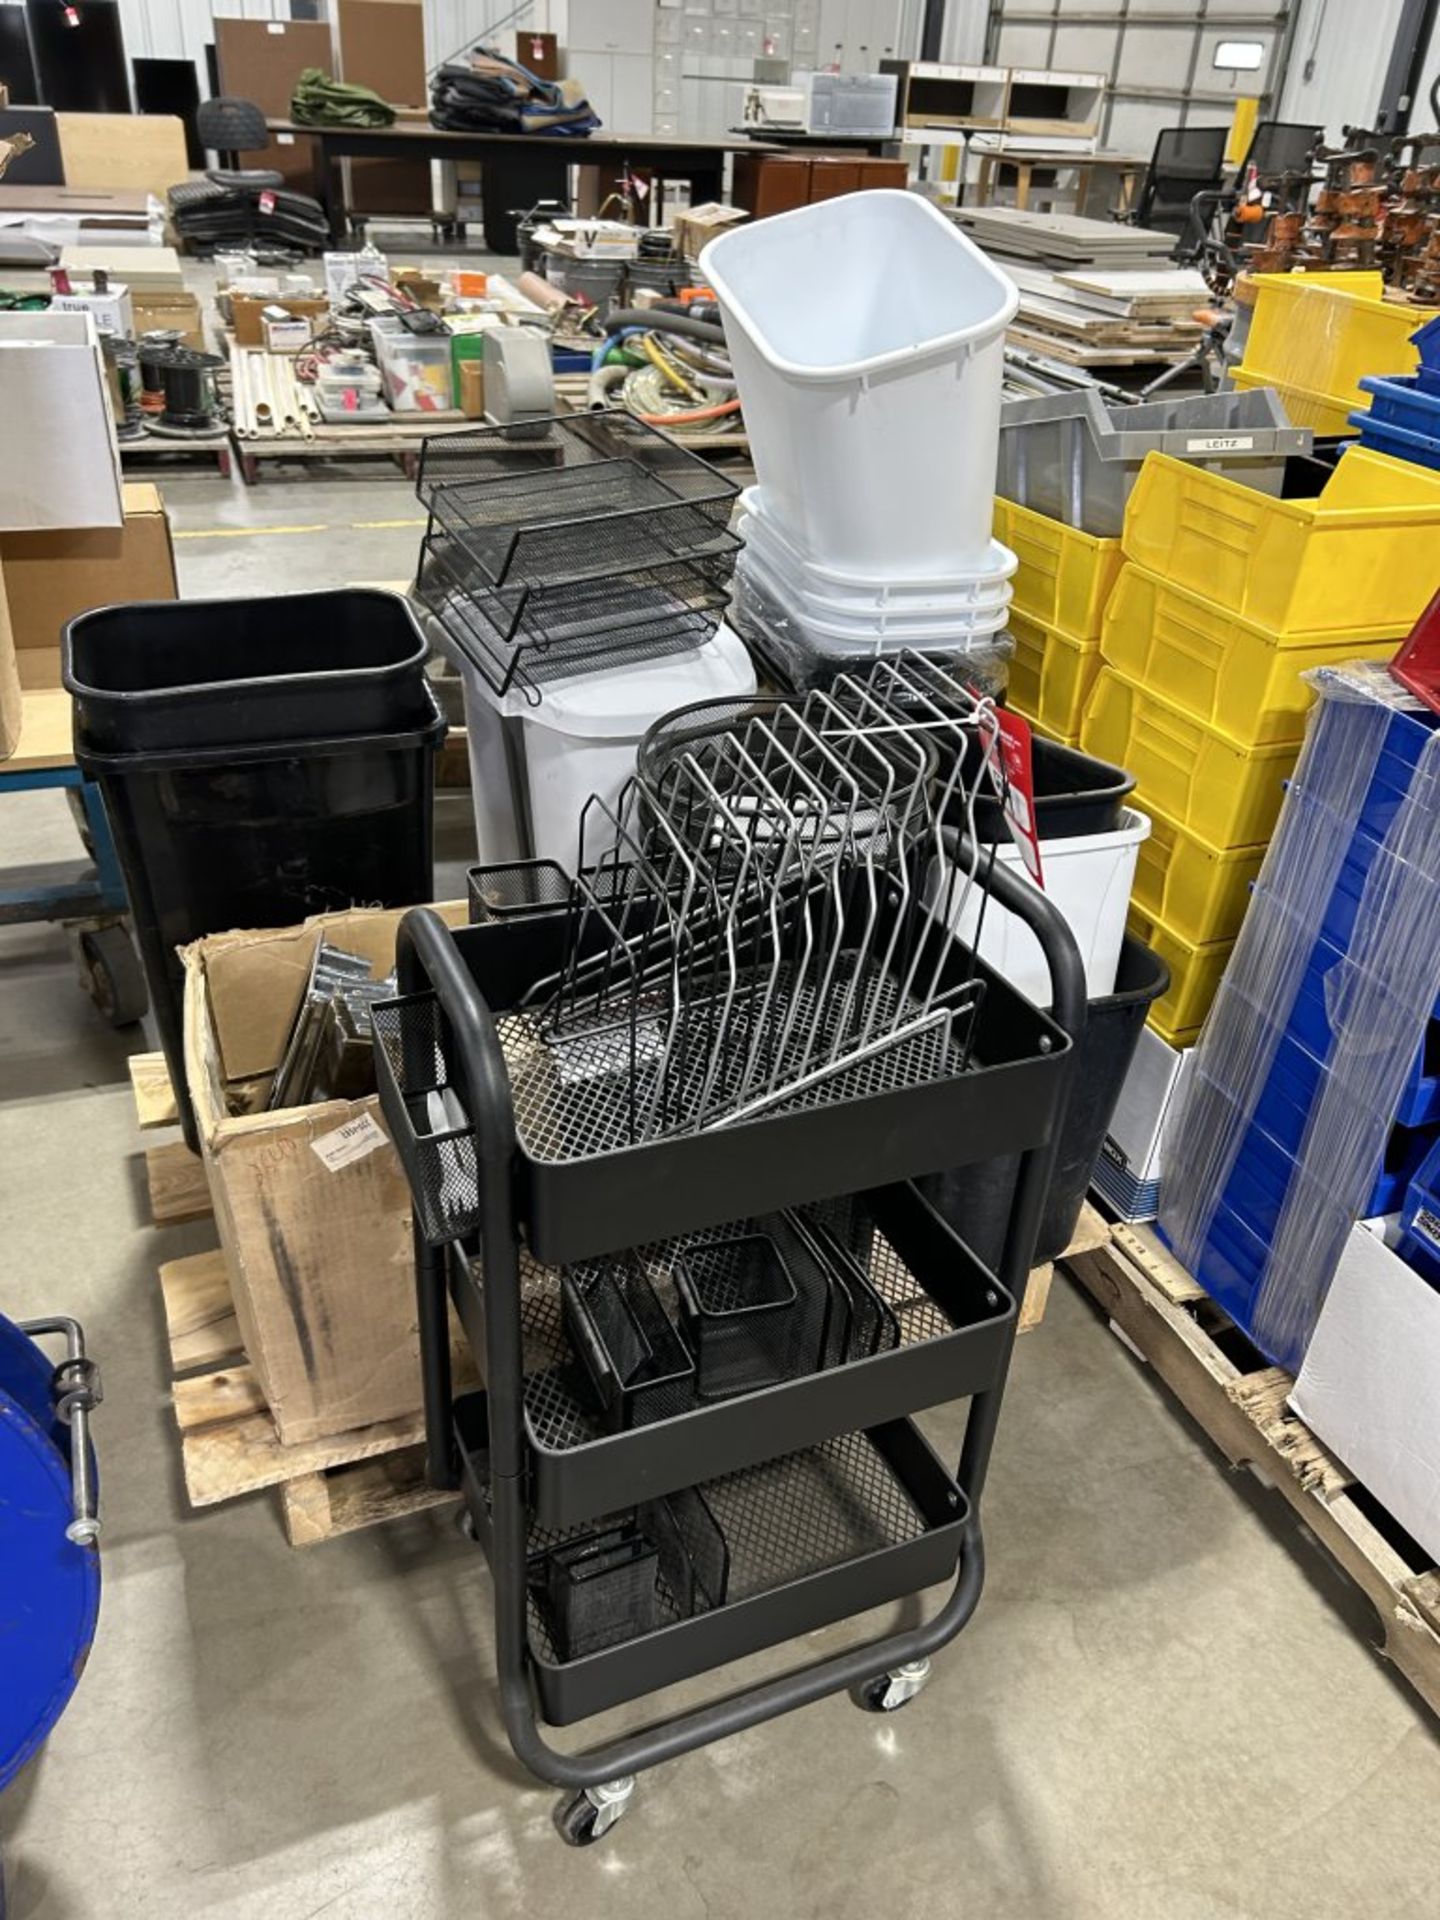 PALLET FULL OF APPROX (20) SMALL TRASH CANS, PAPER TRAYS AND FILE SORTERS, ROLL-AROUND OFFICE SUPPLY